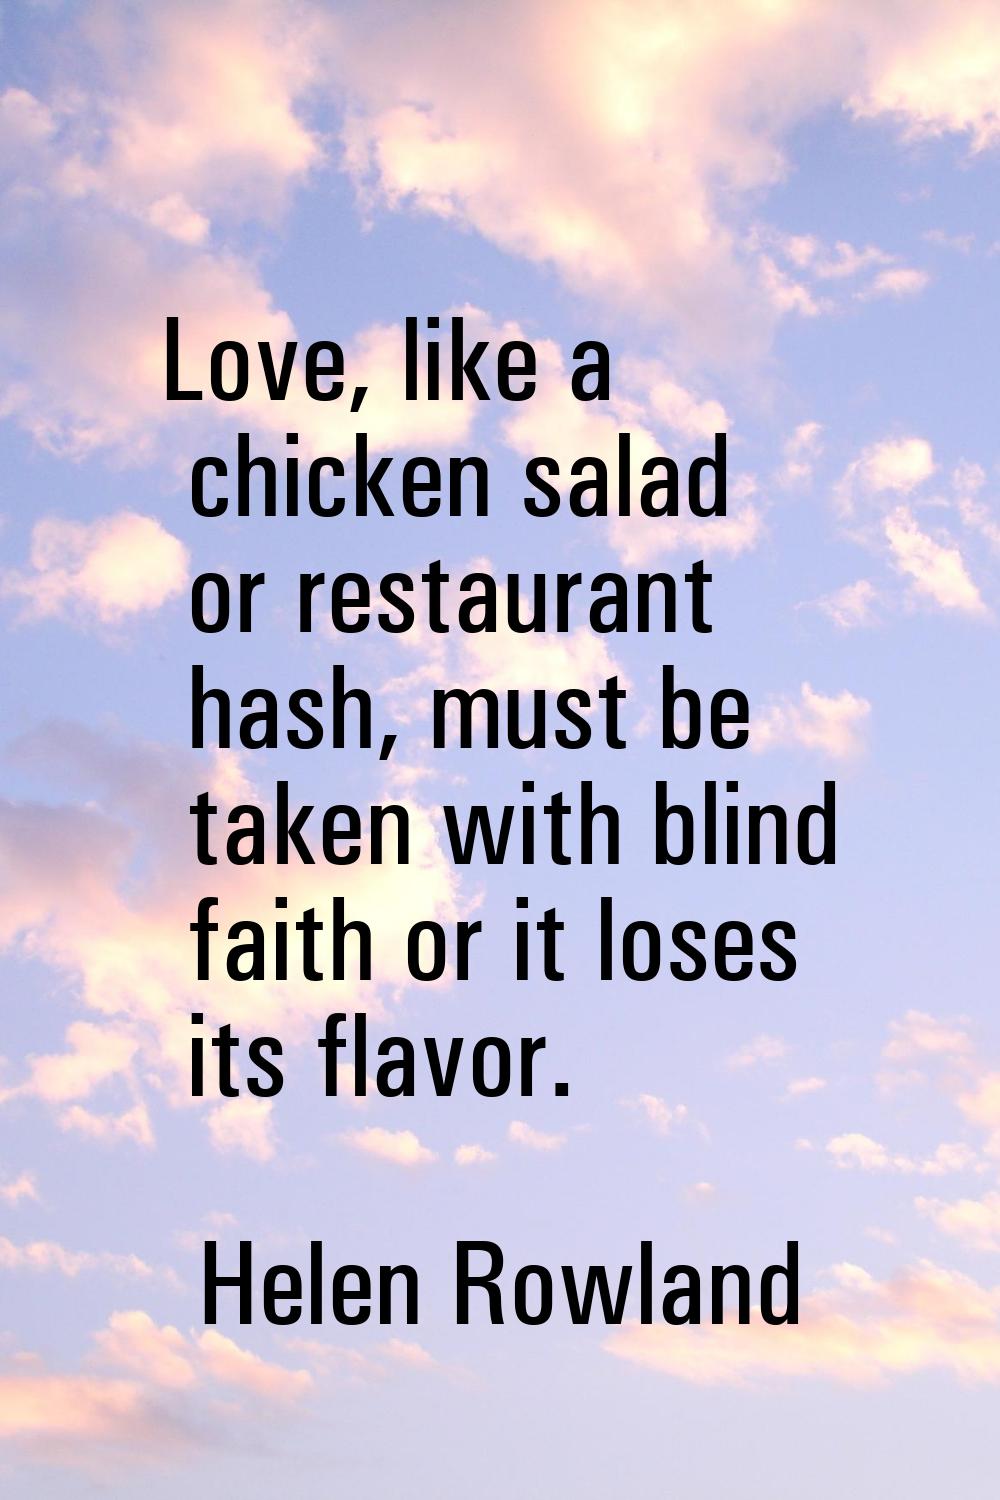 Love, like a chicken salad or restaurant hash, must be taken with blind faith or it loses its flavo